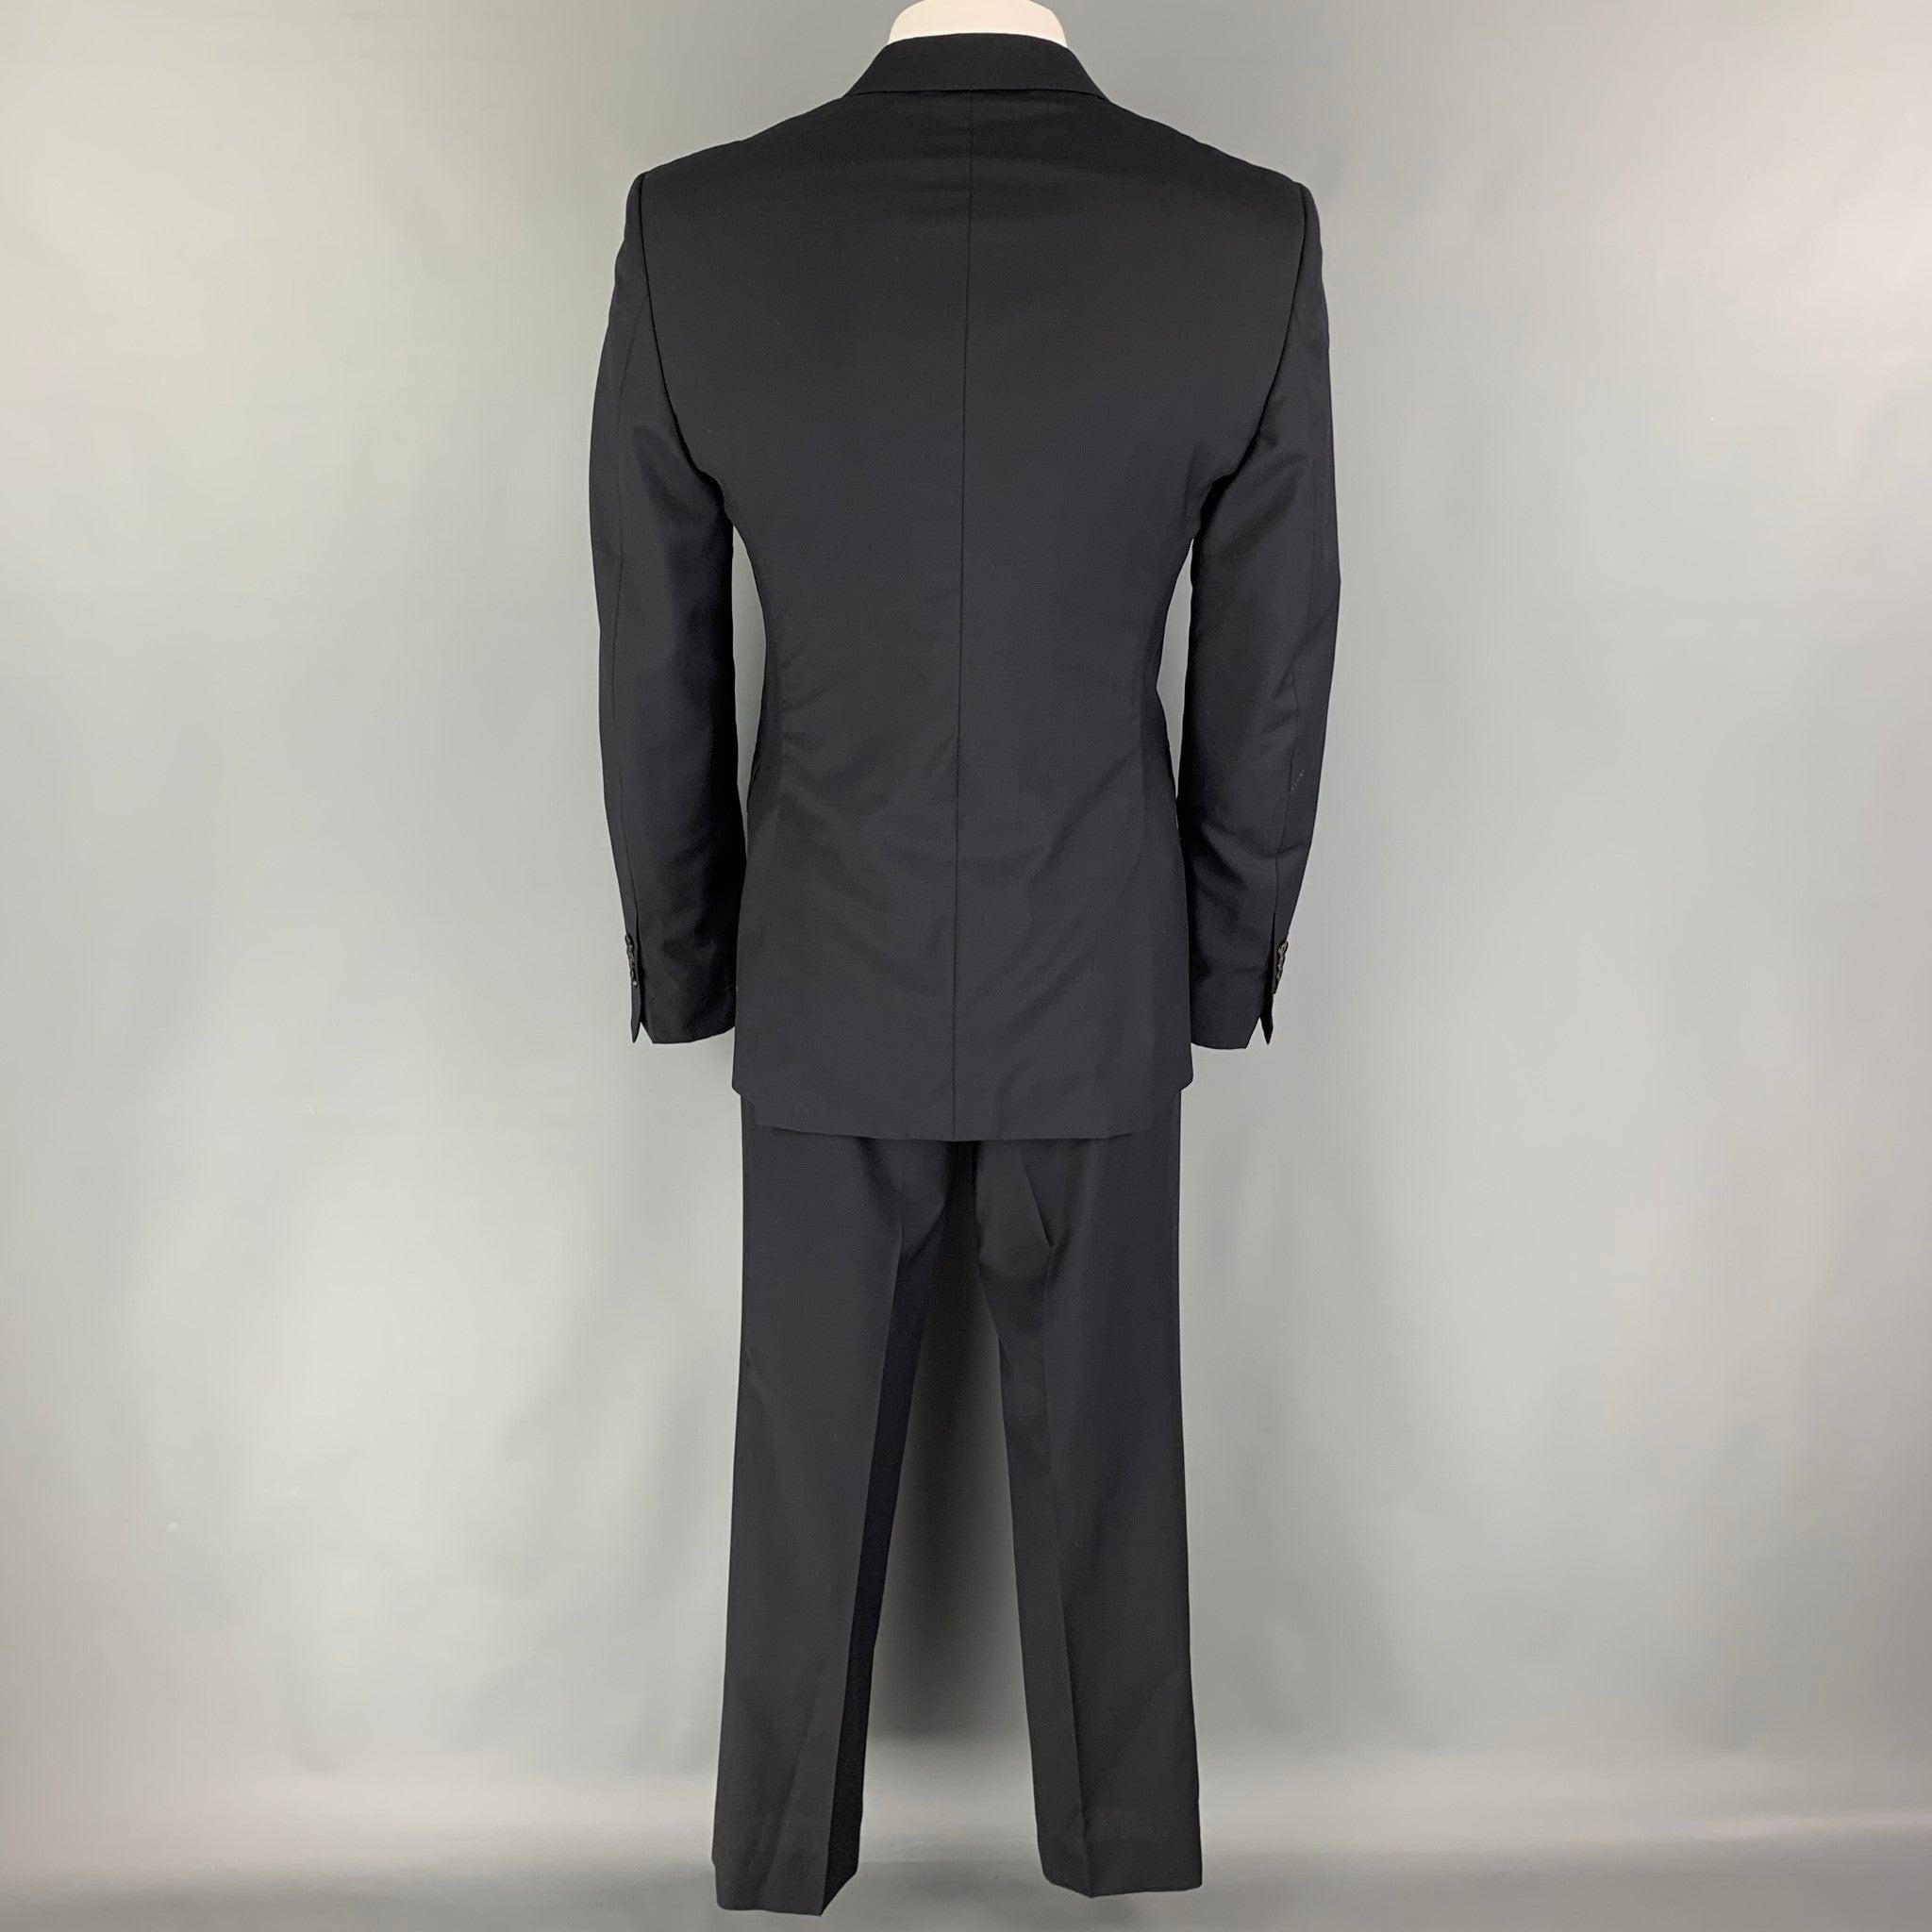 BURBERRY LONDON Size 46 Navy Wool Notch Lapel Suit In Excellent Condition For Sale In San Francisco, CA